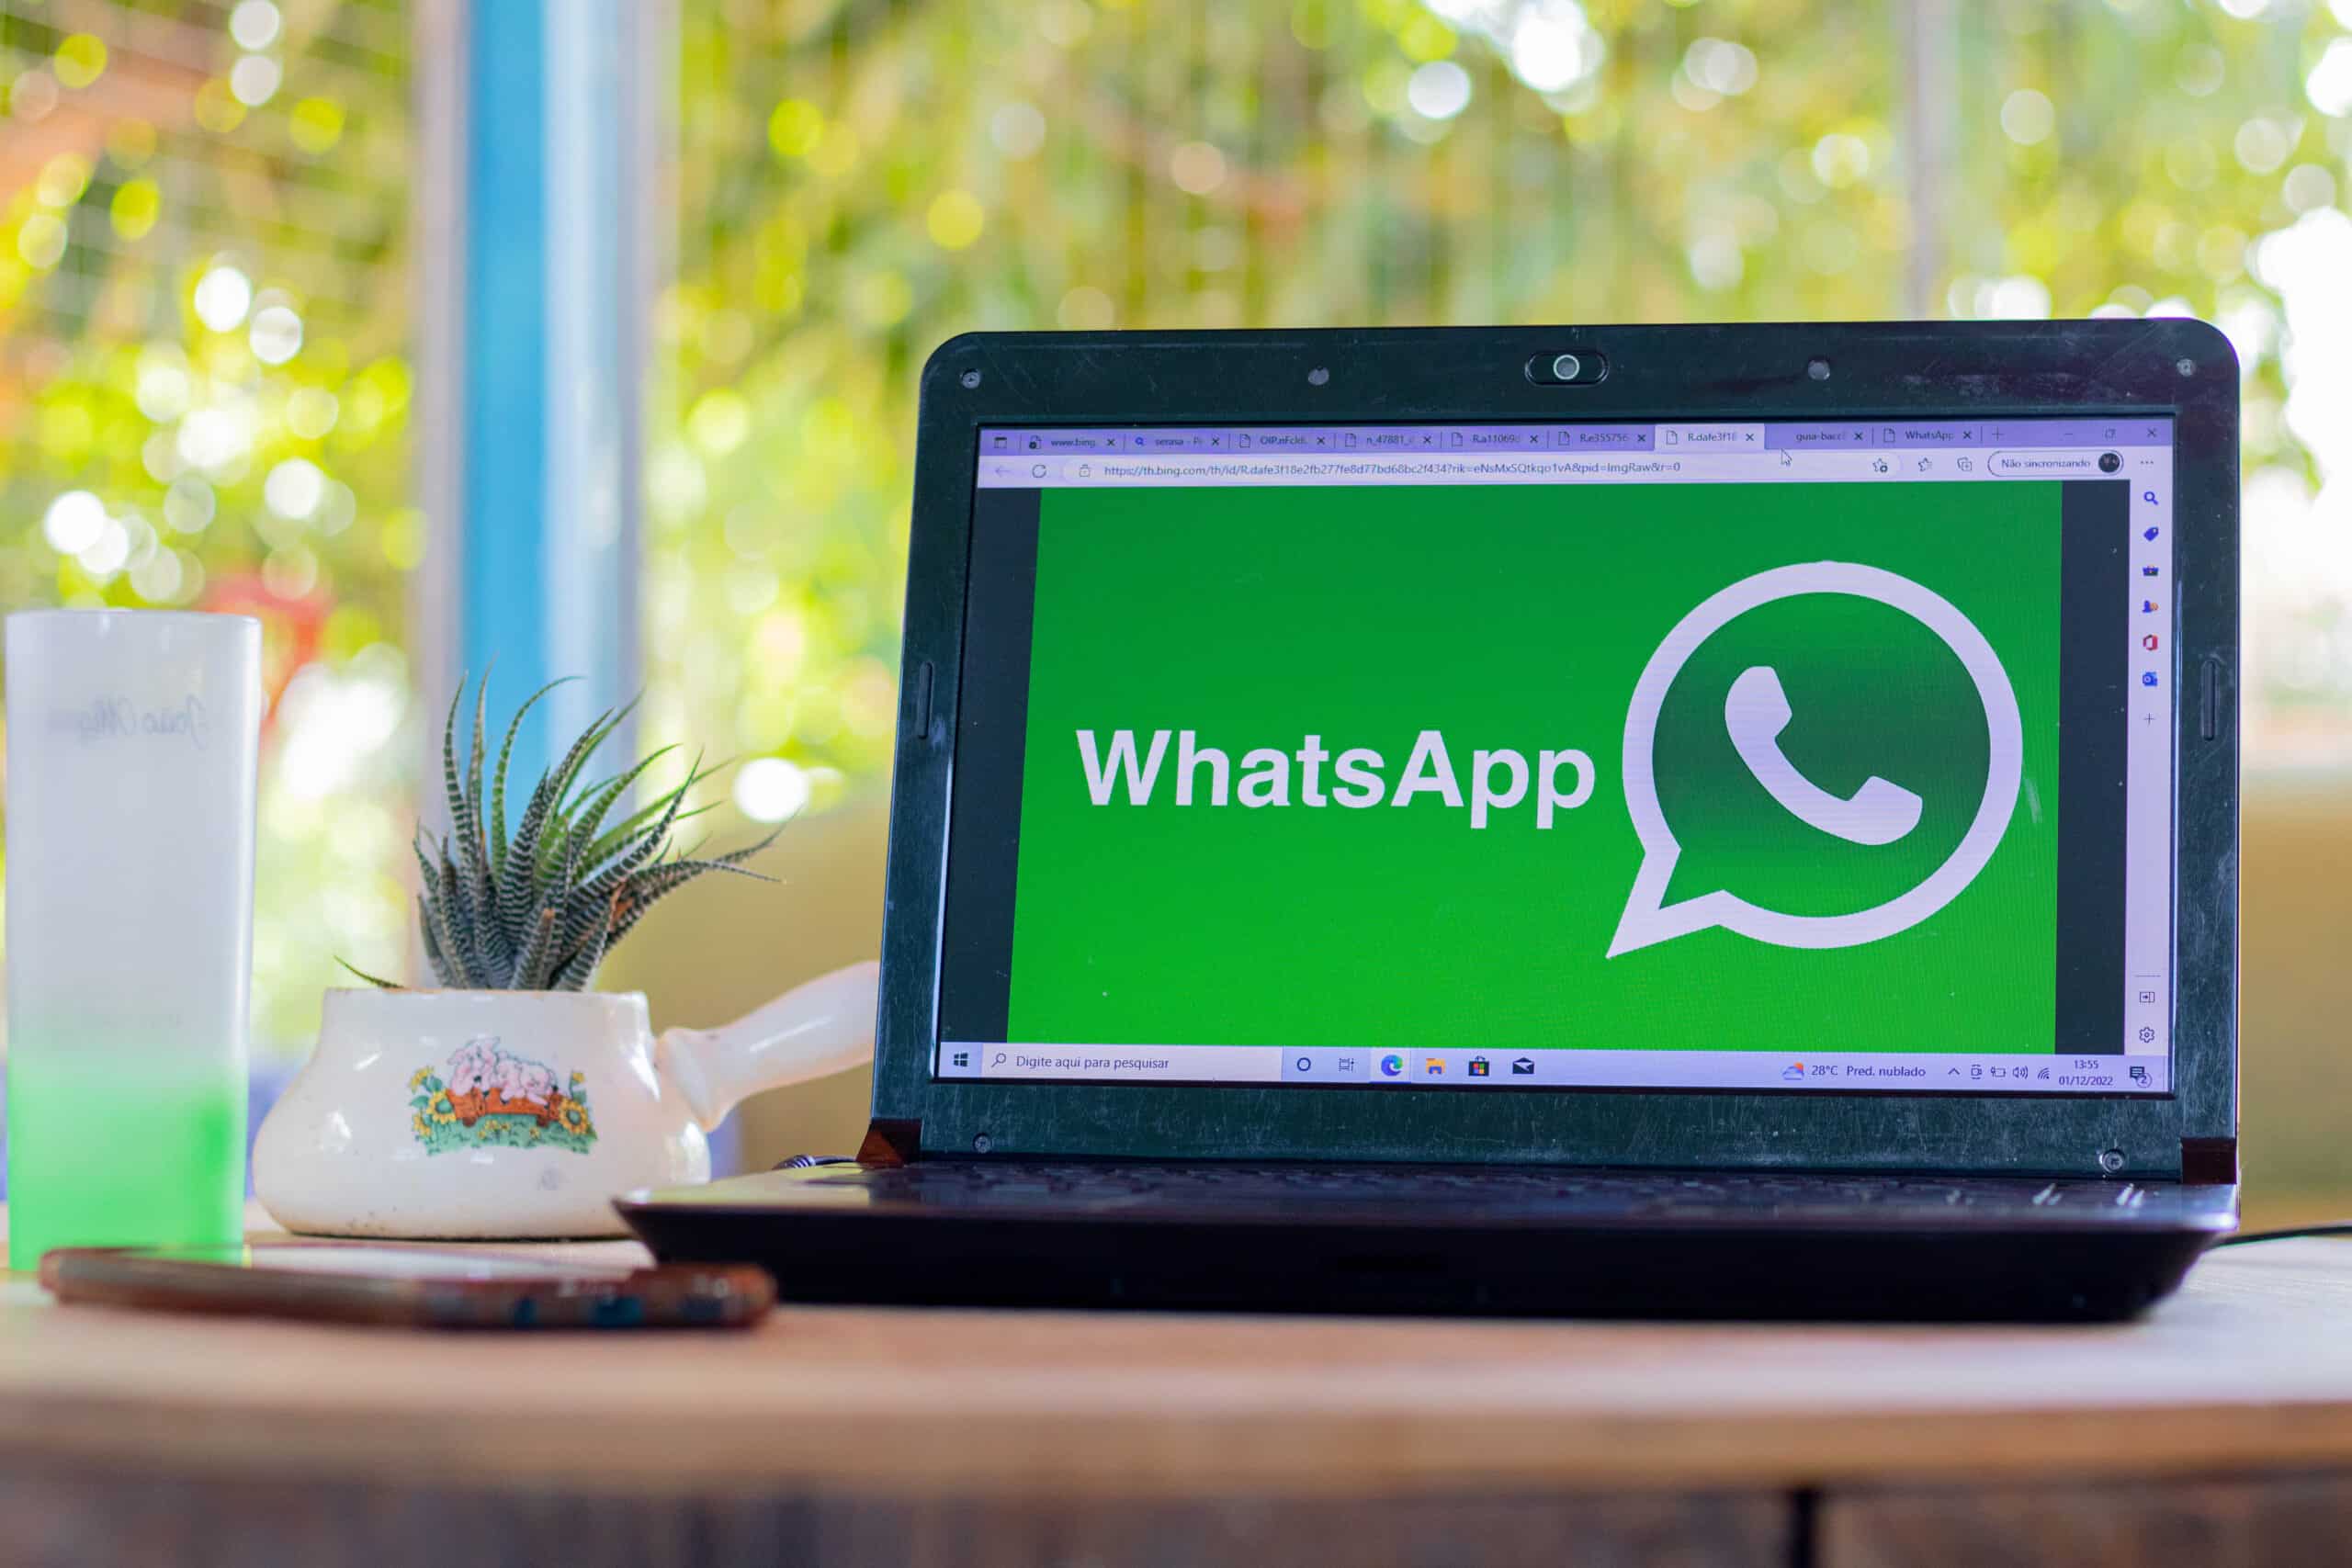 Tips for sharing your location securely via WhatsApp